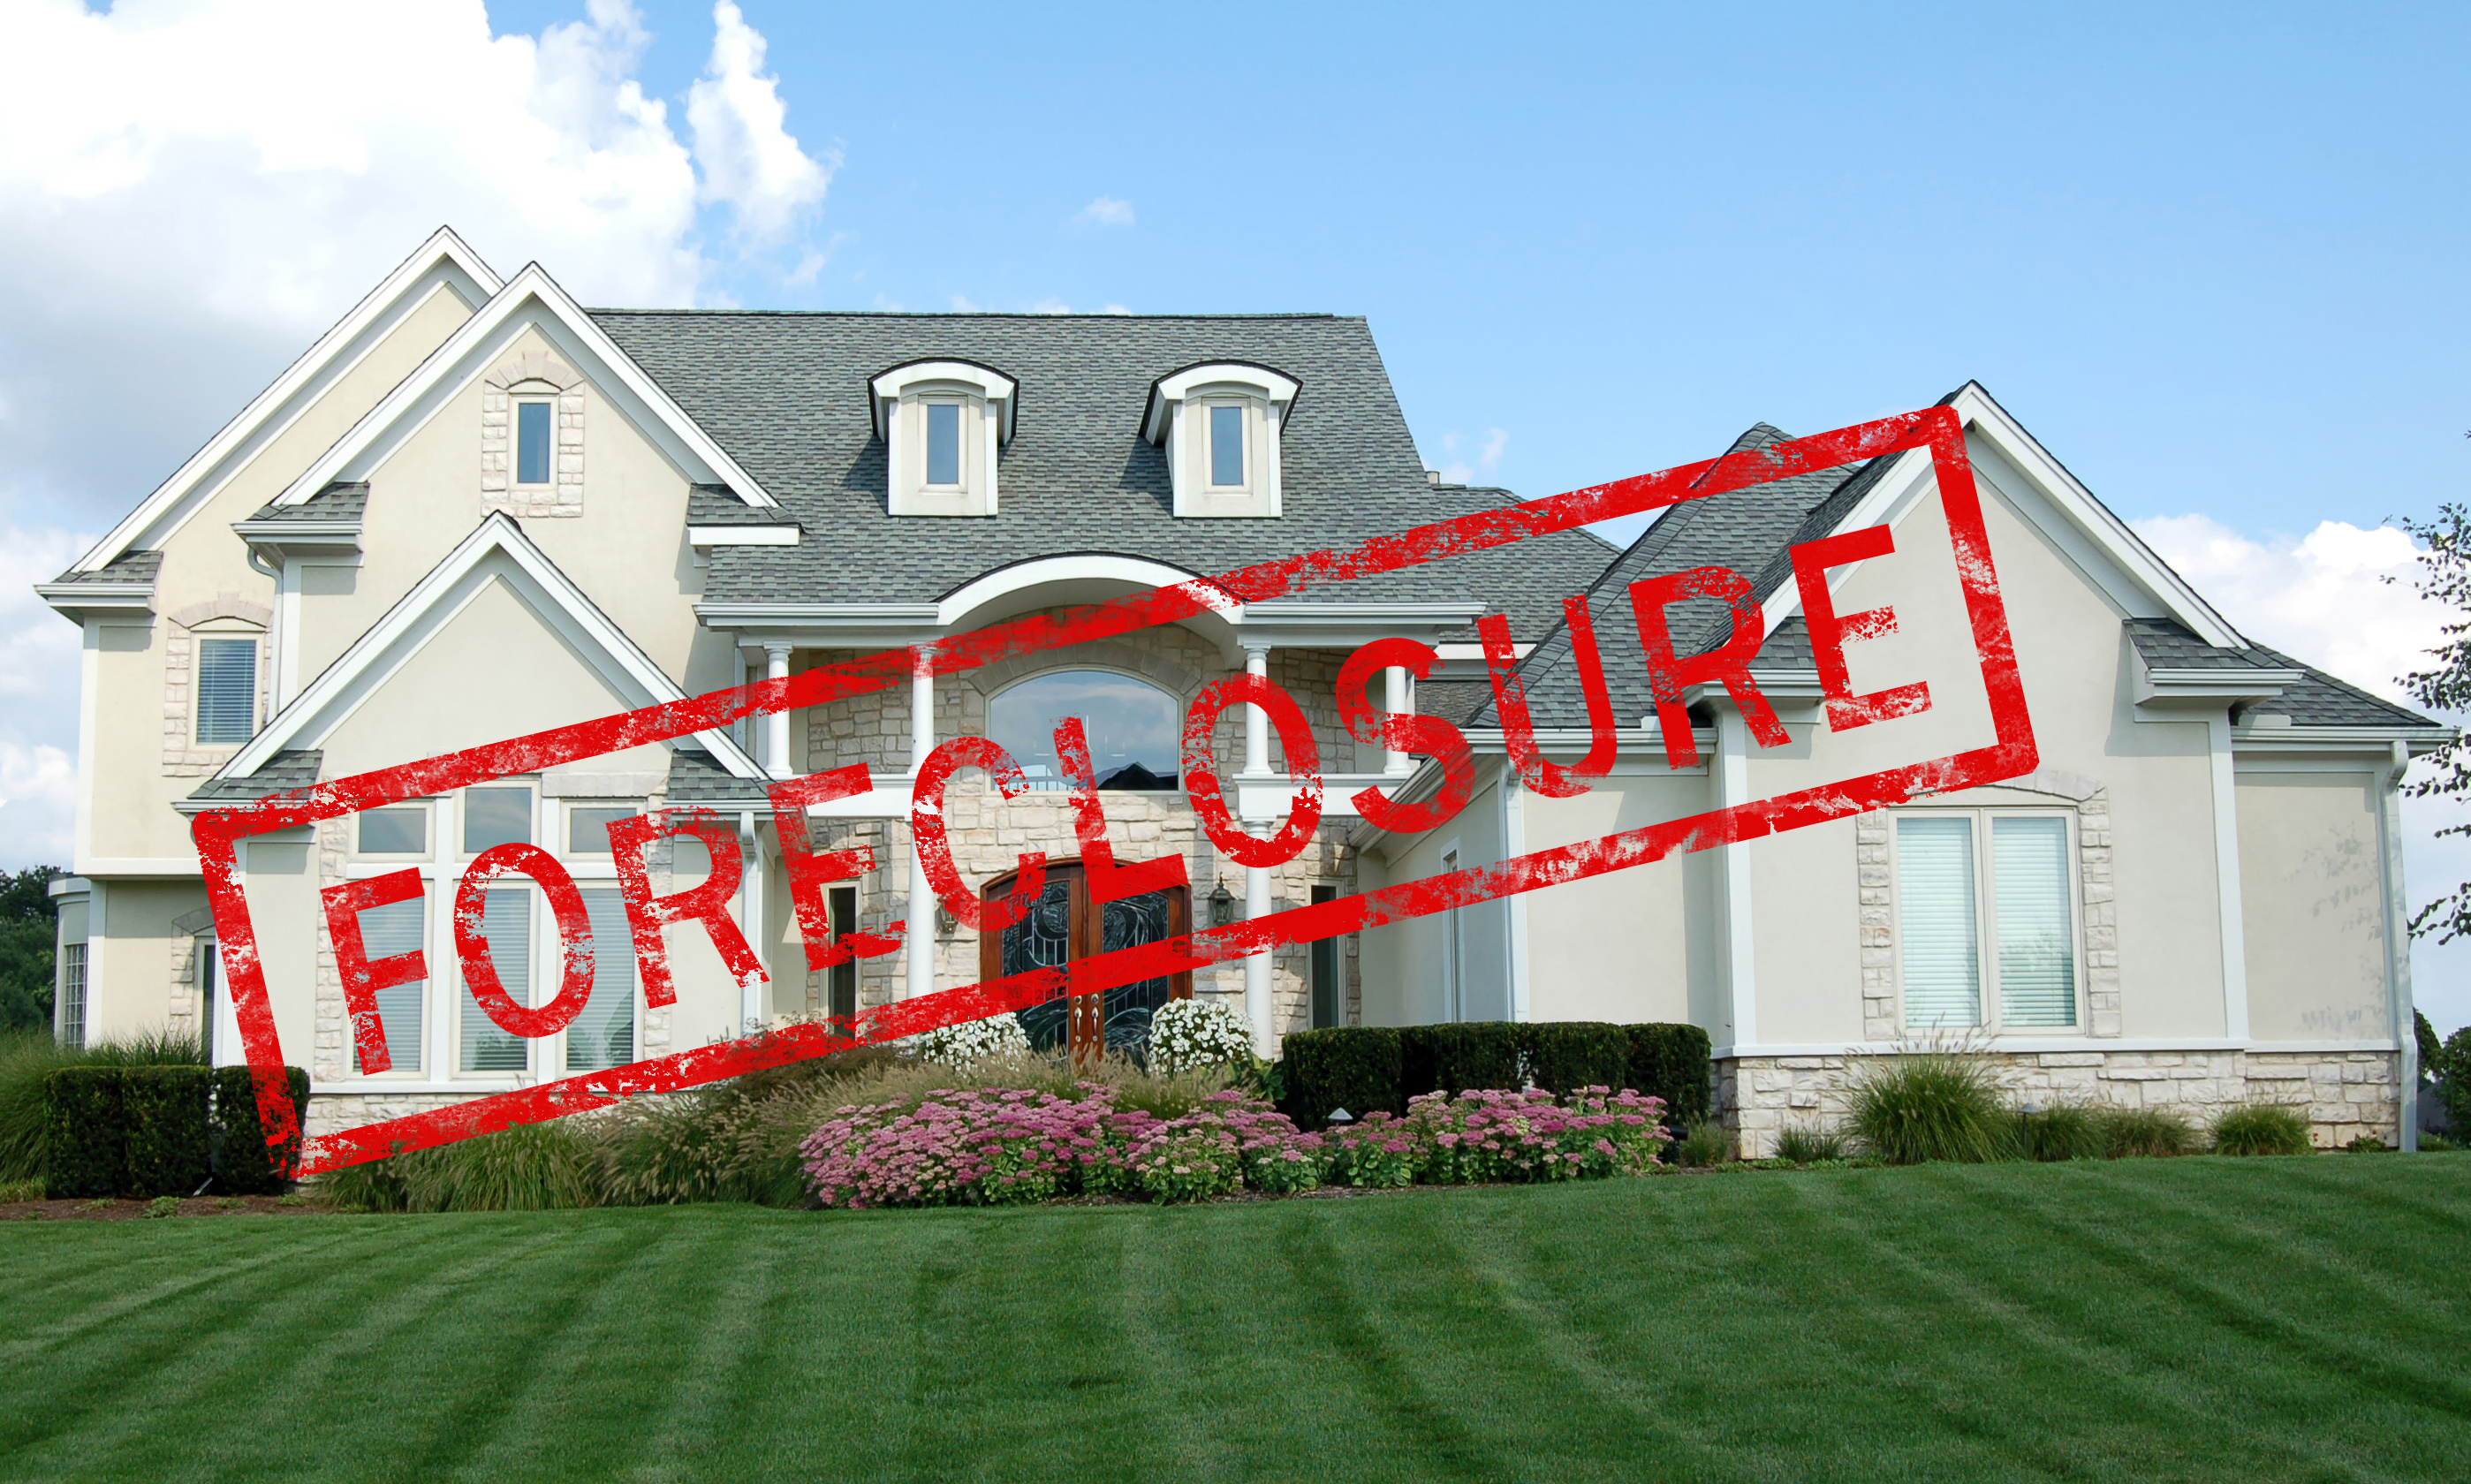 Call Darrow Appraisal Services to order appraisals on Grafton foreclosures